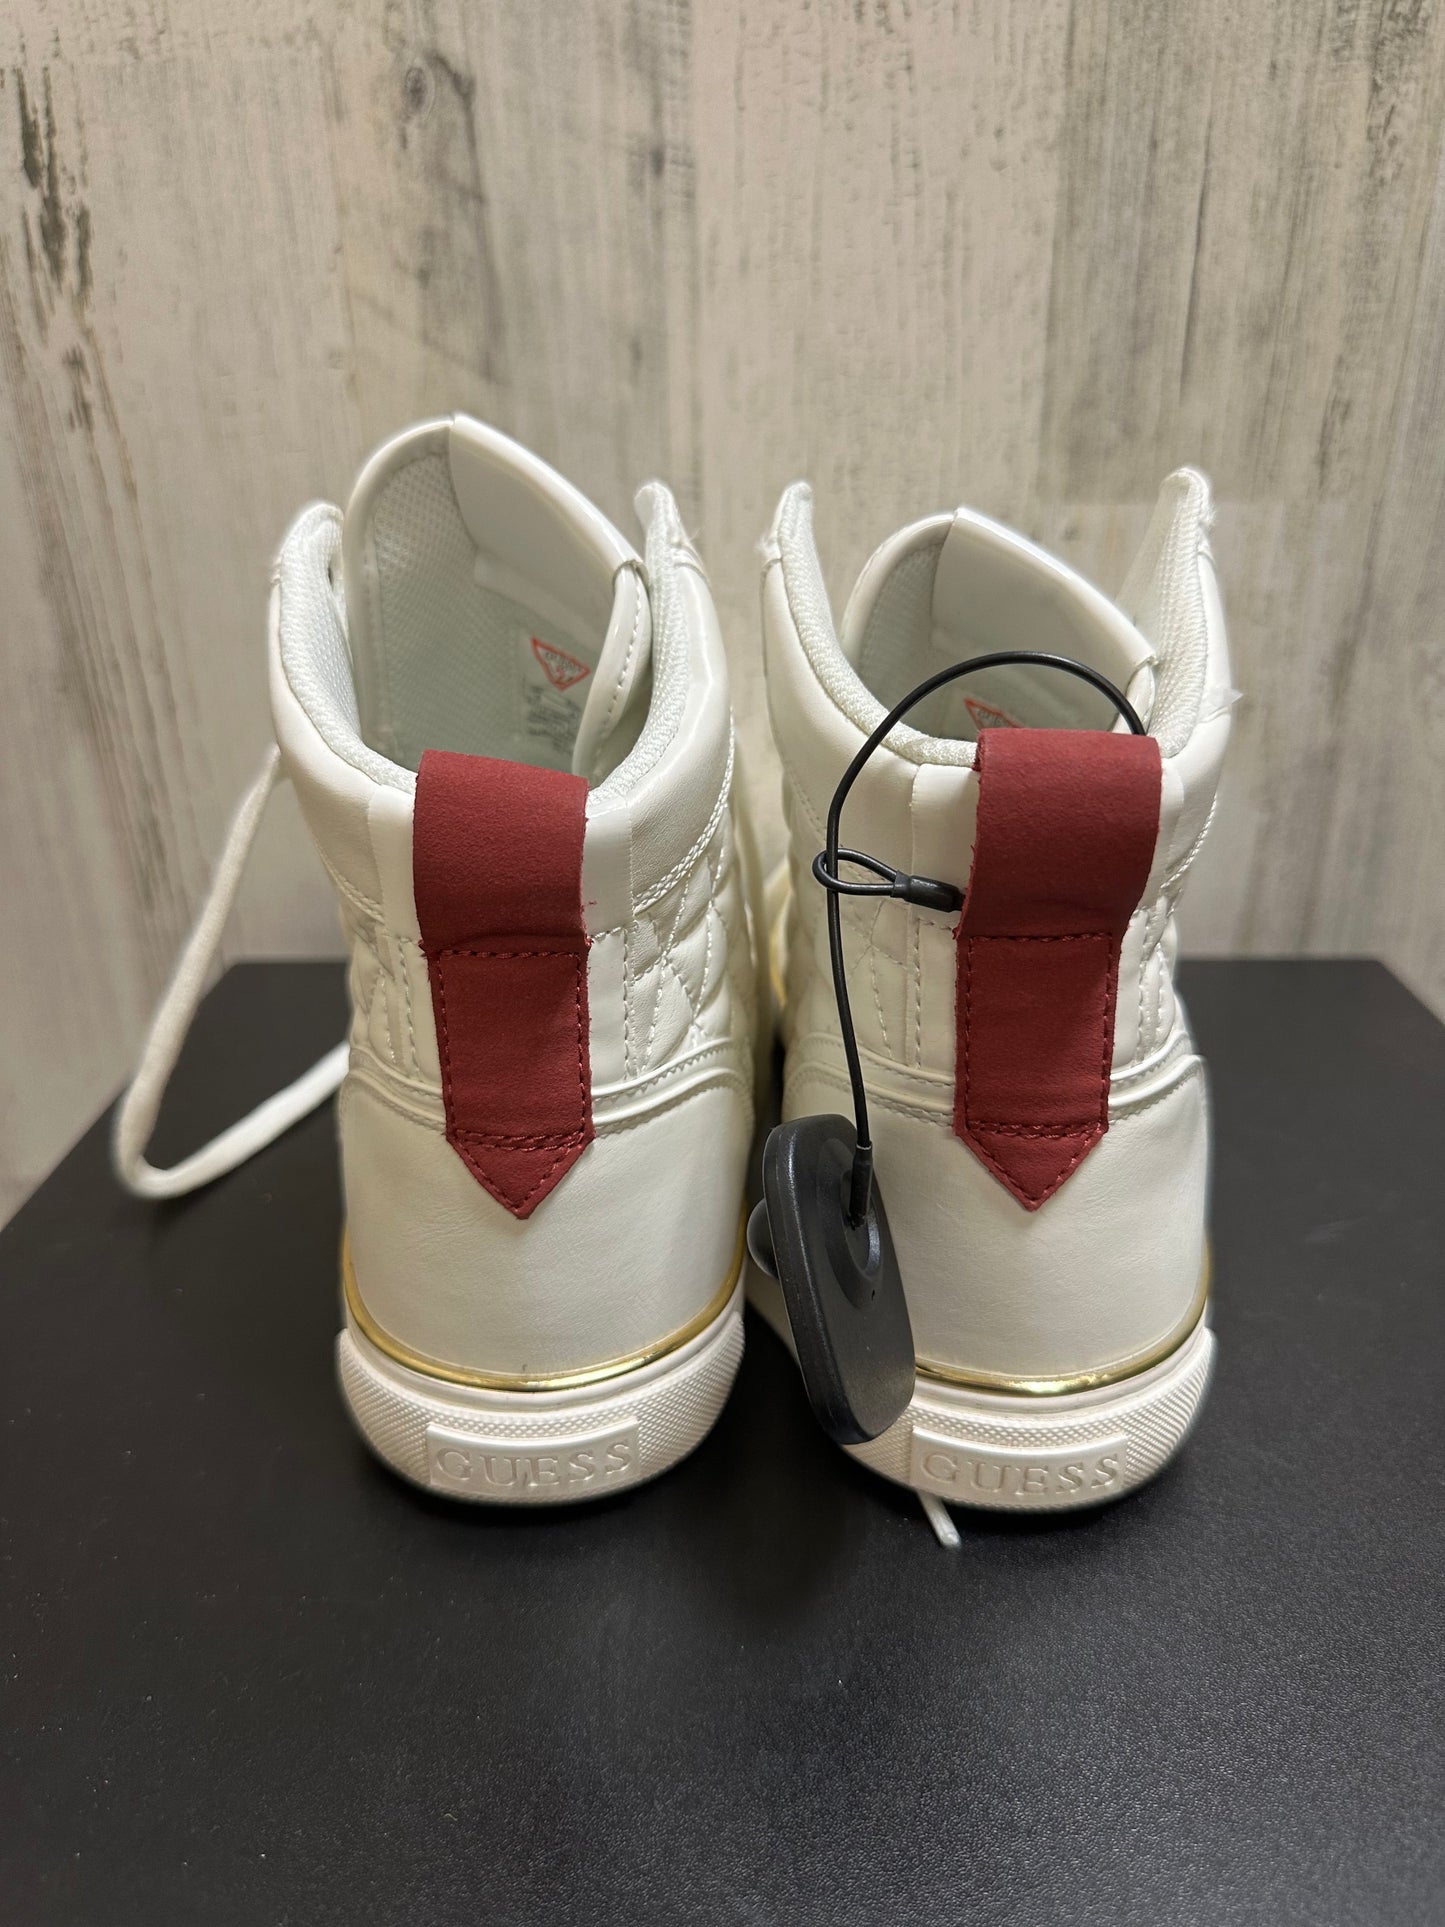 White Shoes Sneakers Guess, Size 8